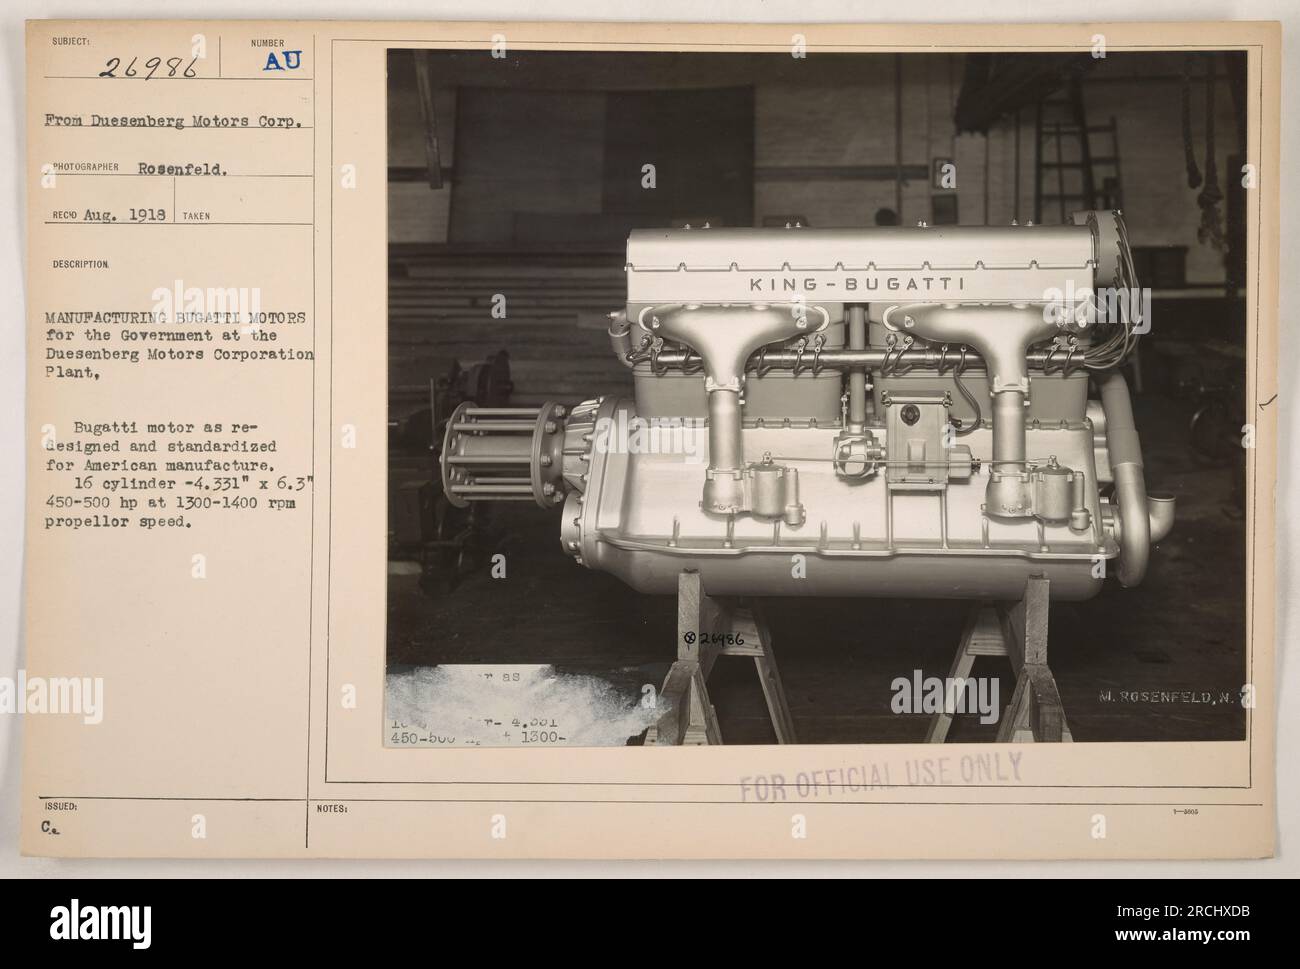 Image of a Bugatti motor being manufactured at the Duesenberg Motors Corporation Plant in 1918. The Bugatti motor has been re-designed and standardized for American manufacture. It is a 16 cylinder engine, measuring 4.331' x 6.3 and producing 450-500 horsepower at 1300-1400 rpm propeller speed. The photograph was taken by Rosenfeld from Duesenberg Motors Corp. Stock Photo